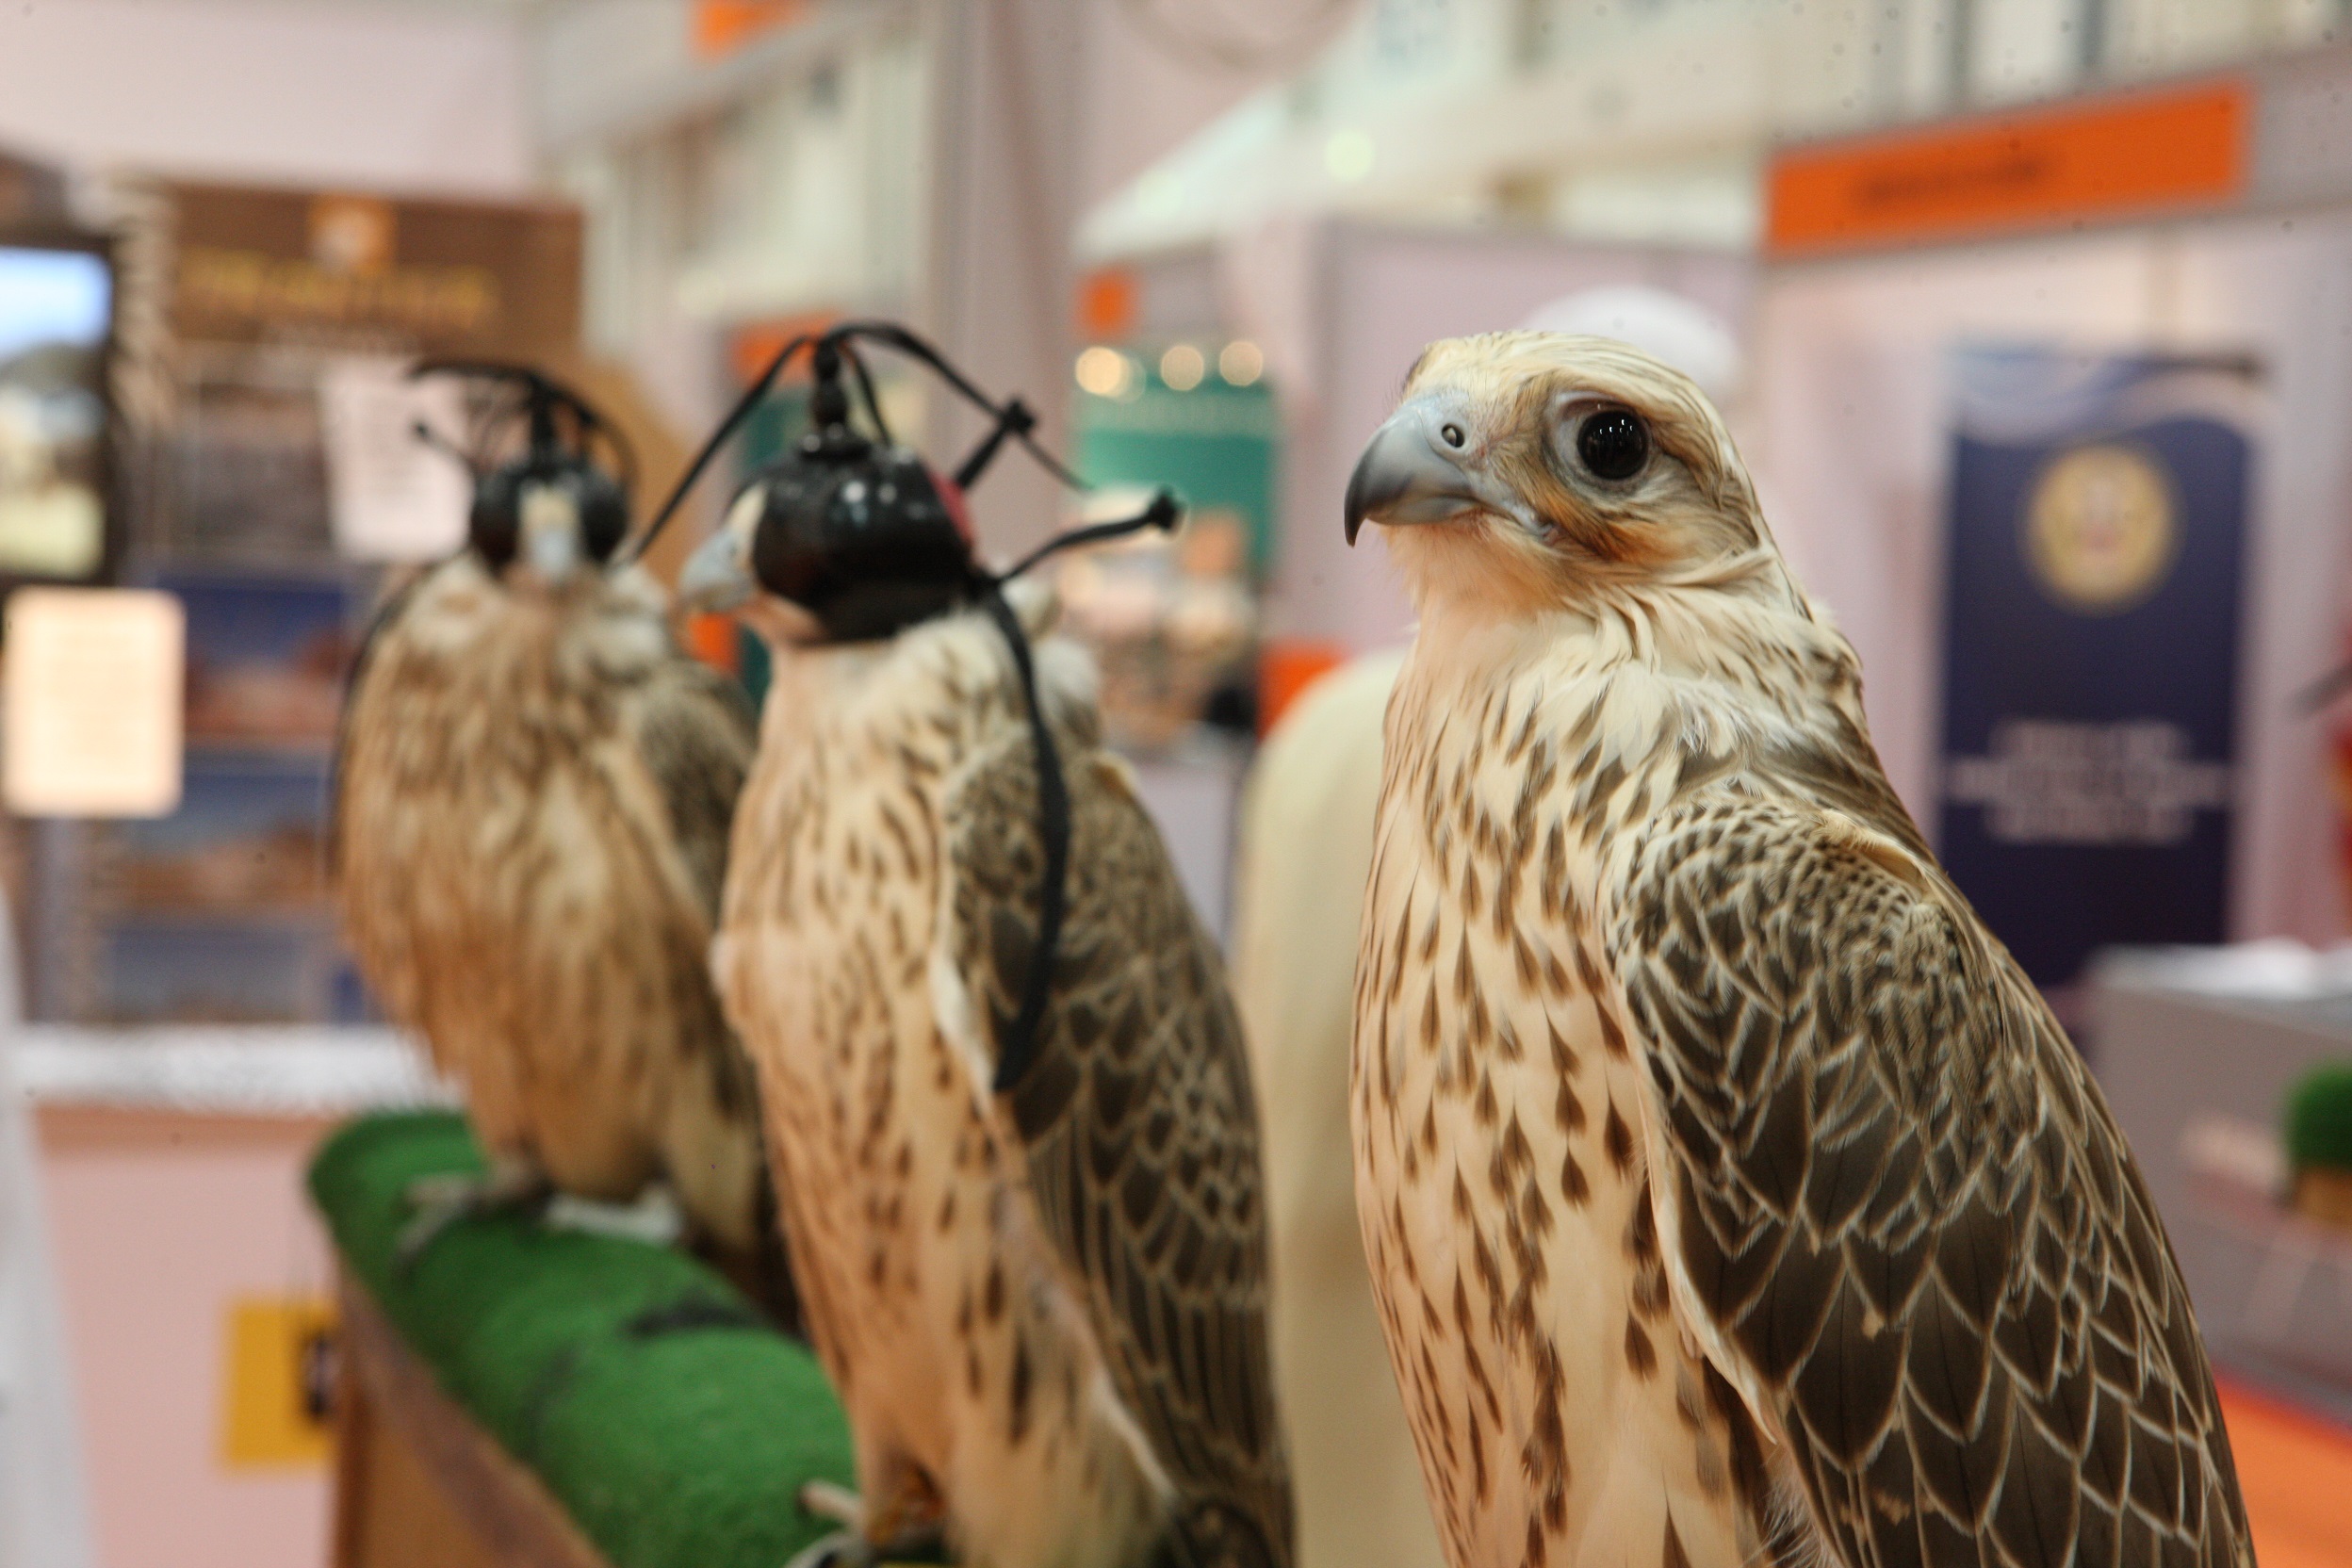 Abu Dhabi falcon competition to find the most beautiful bird